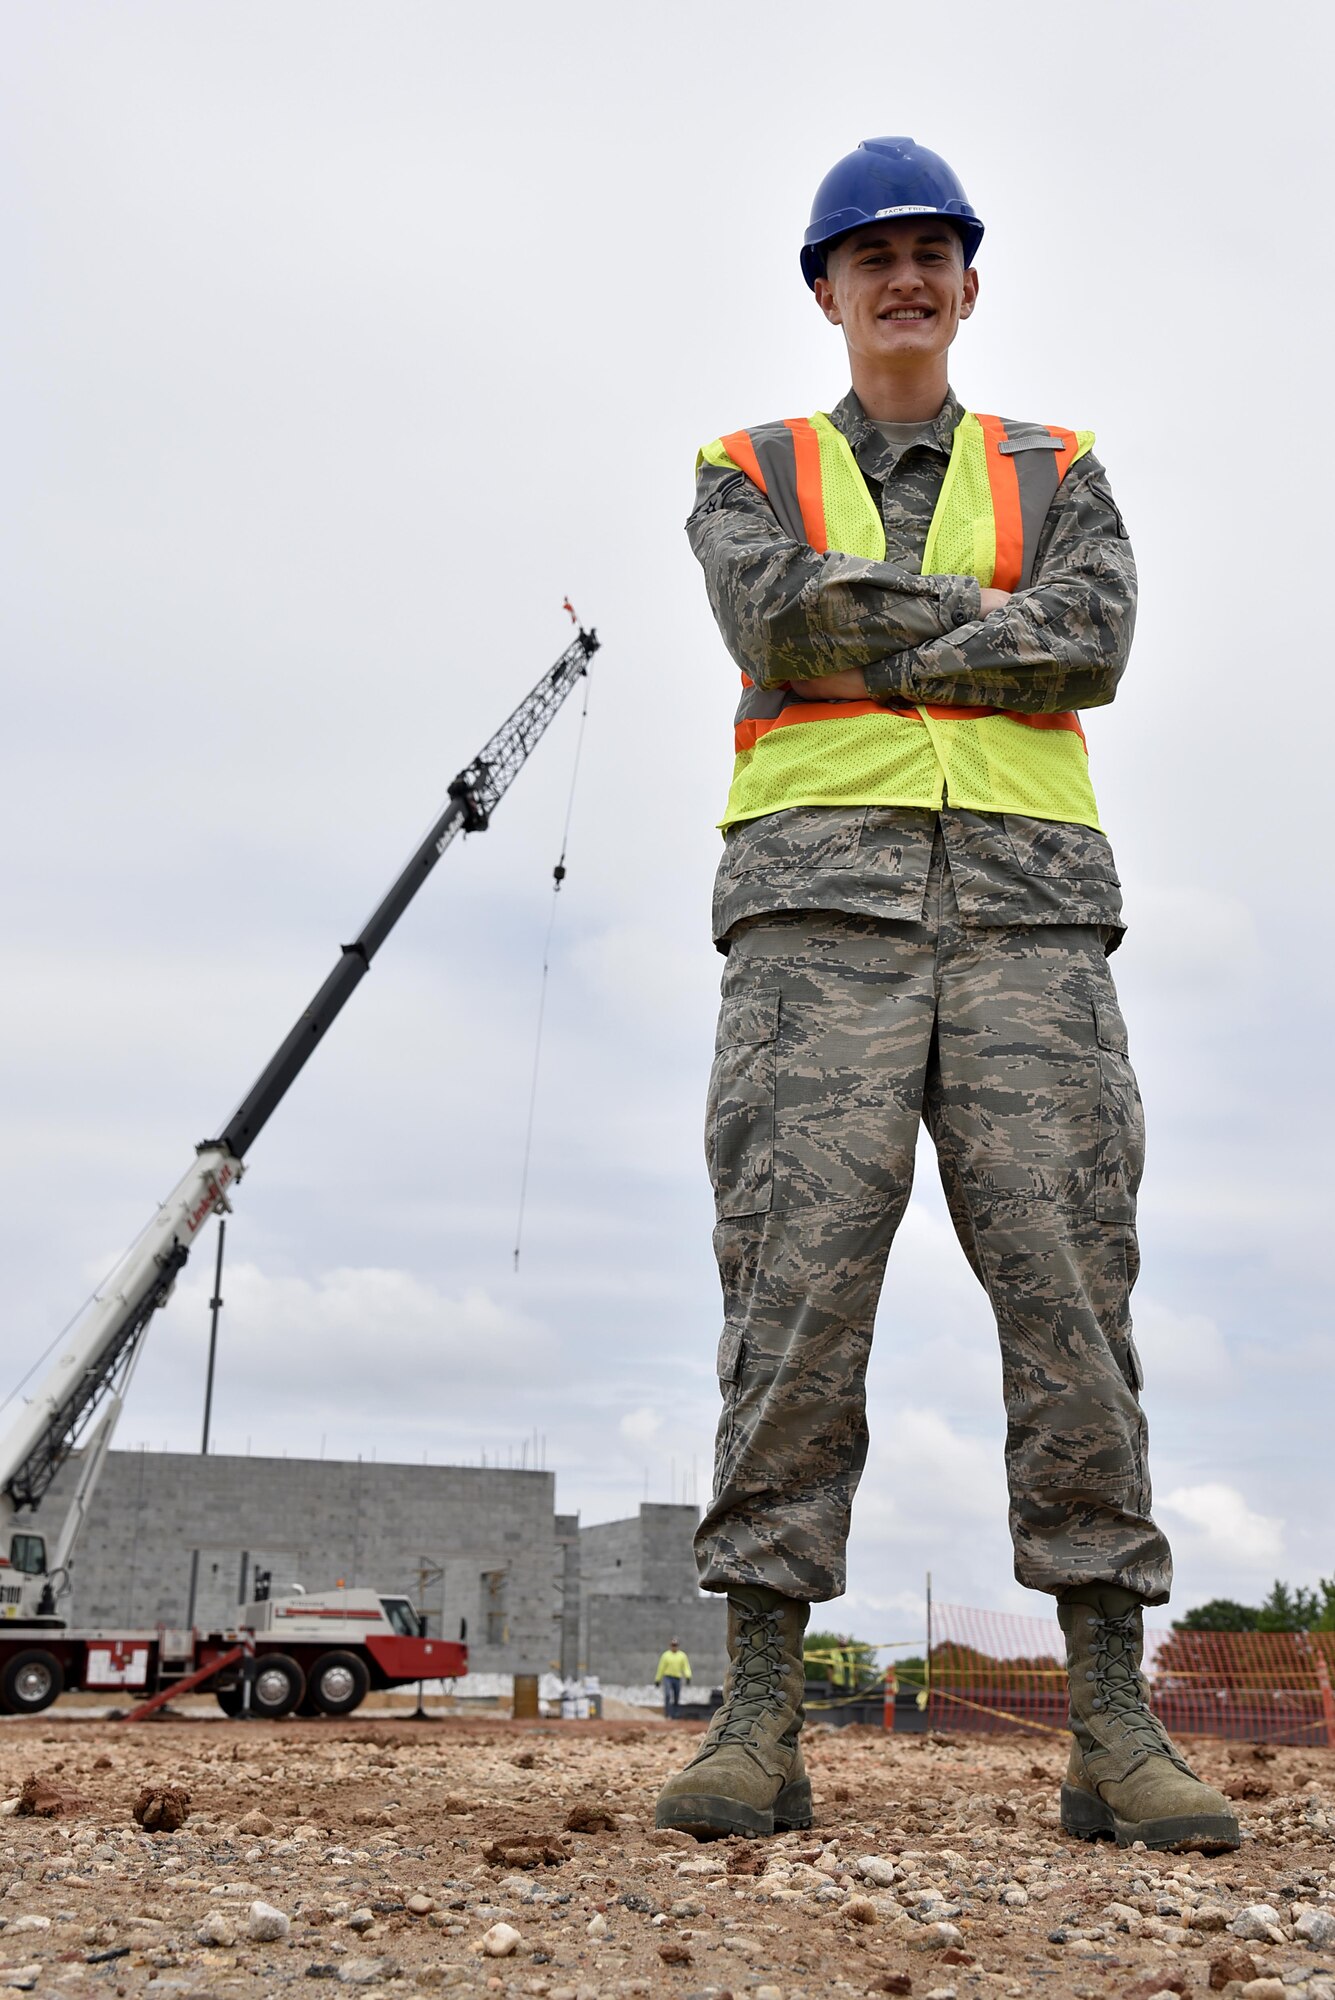 Airman 1st Class Zachary Free, 175th Civil Engineering Squadron, stands in a trailer on-site May 24, 2017 at Warfield Air National Guard Base, Middle, River, Md. Free uses the trailer occasional to assist contractors overnight shifts. (U.S. Air National Guard photo by Airman Sarah M. McClanahan /Released Master Sgt. Chris Schepers)